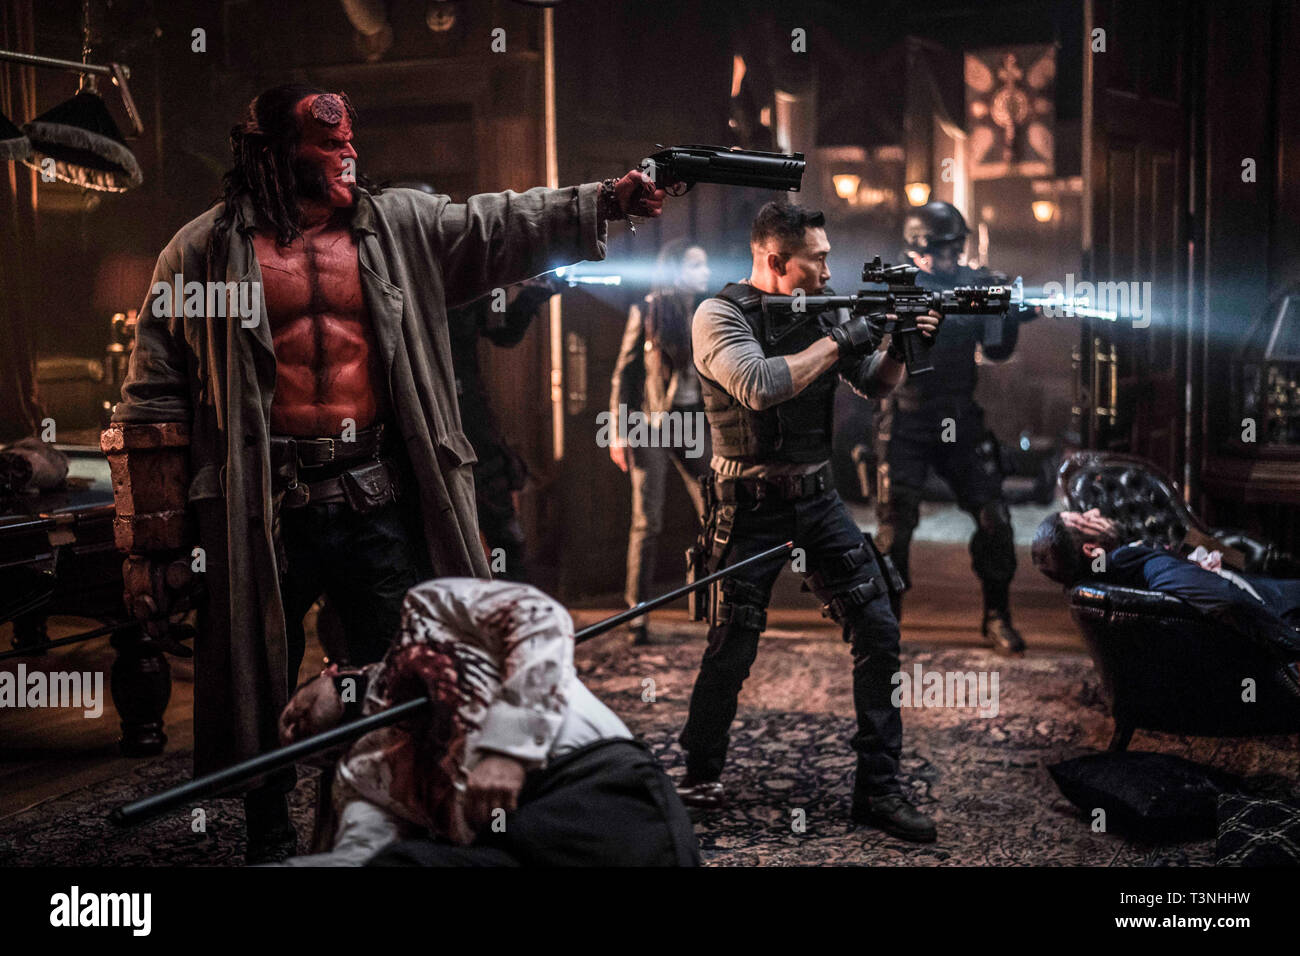 RELEASE DATE: April 12, 2019 TITLE: Hellboy STUDIO: Lionsgate DIRECTOR: Neil Marshall PLOT: Based on the graphic novels by Mike Mignola, Hellboy, caught between the worlds of the supernatural and human, battles an ancient sorceress bent on revenge. STARRING: DANIEL DAY KIM as Ben Daimio, SASHA LANE as Alice Monoghan, DAVID HARBOUR as Hellboy. (Credit Image: © Lionsgate/Entertainment Pictures) Stock Photo